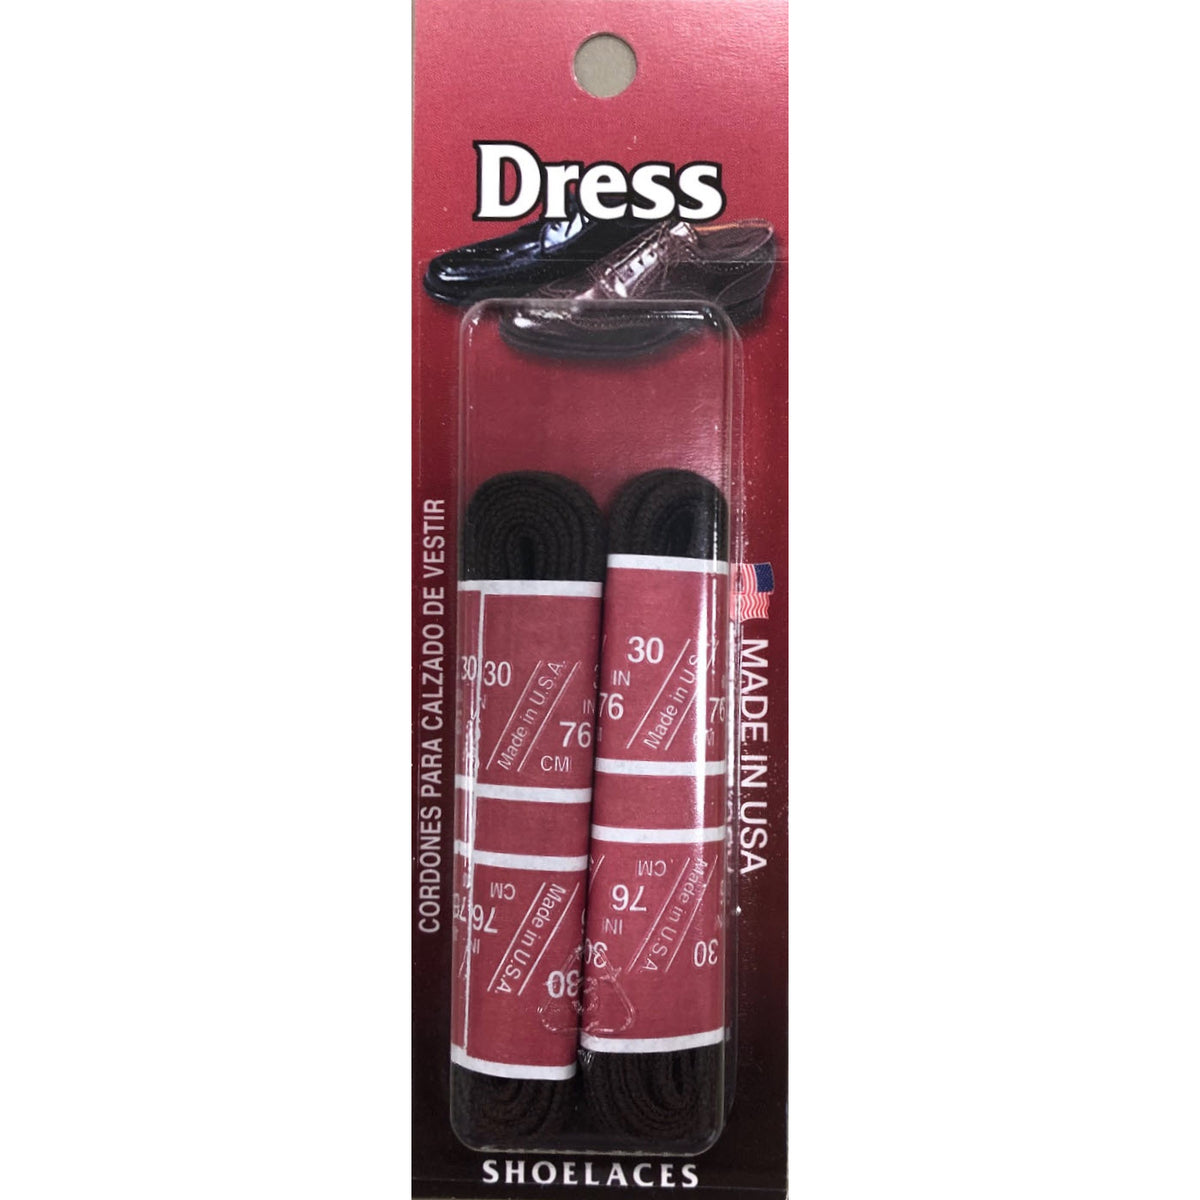 Two pairs of FRANKFORD LEATHER 30 IN ROUND DRESS BROWN shoe laces packaged on a red card labeled &quot;dress&quot; with shoe image, indicating 30 inches length and made in the USA by F.L. Inc.